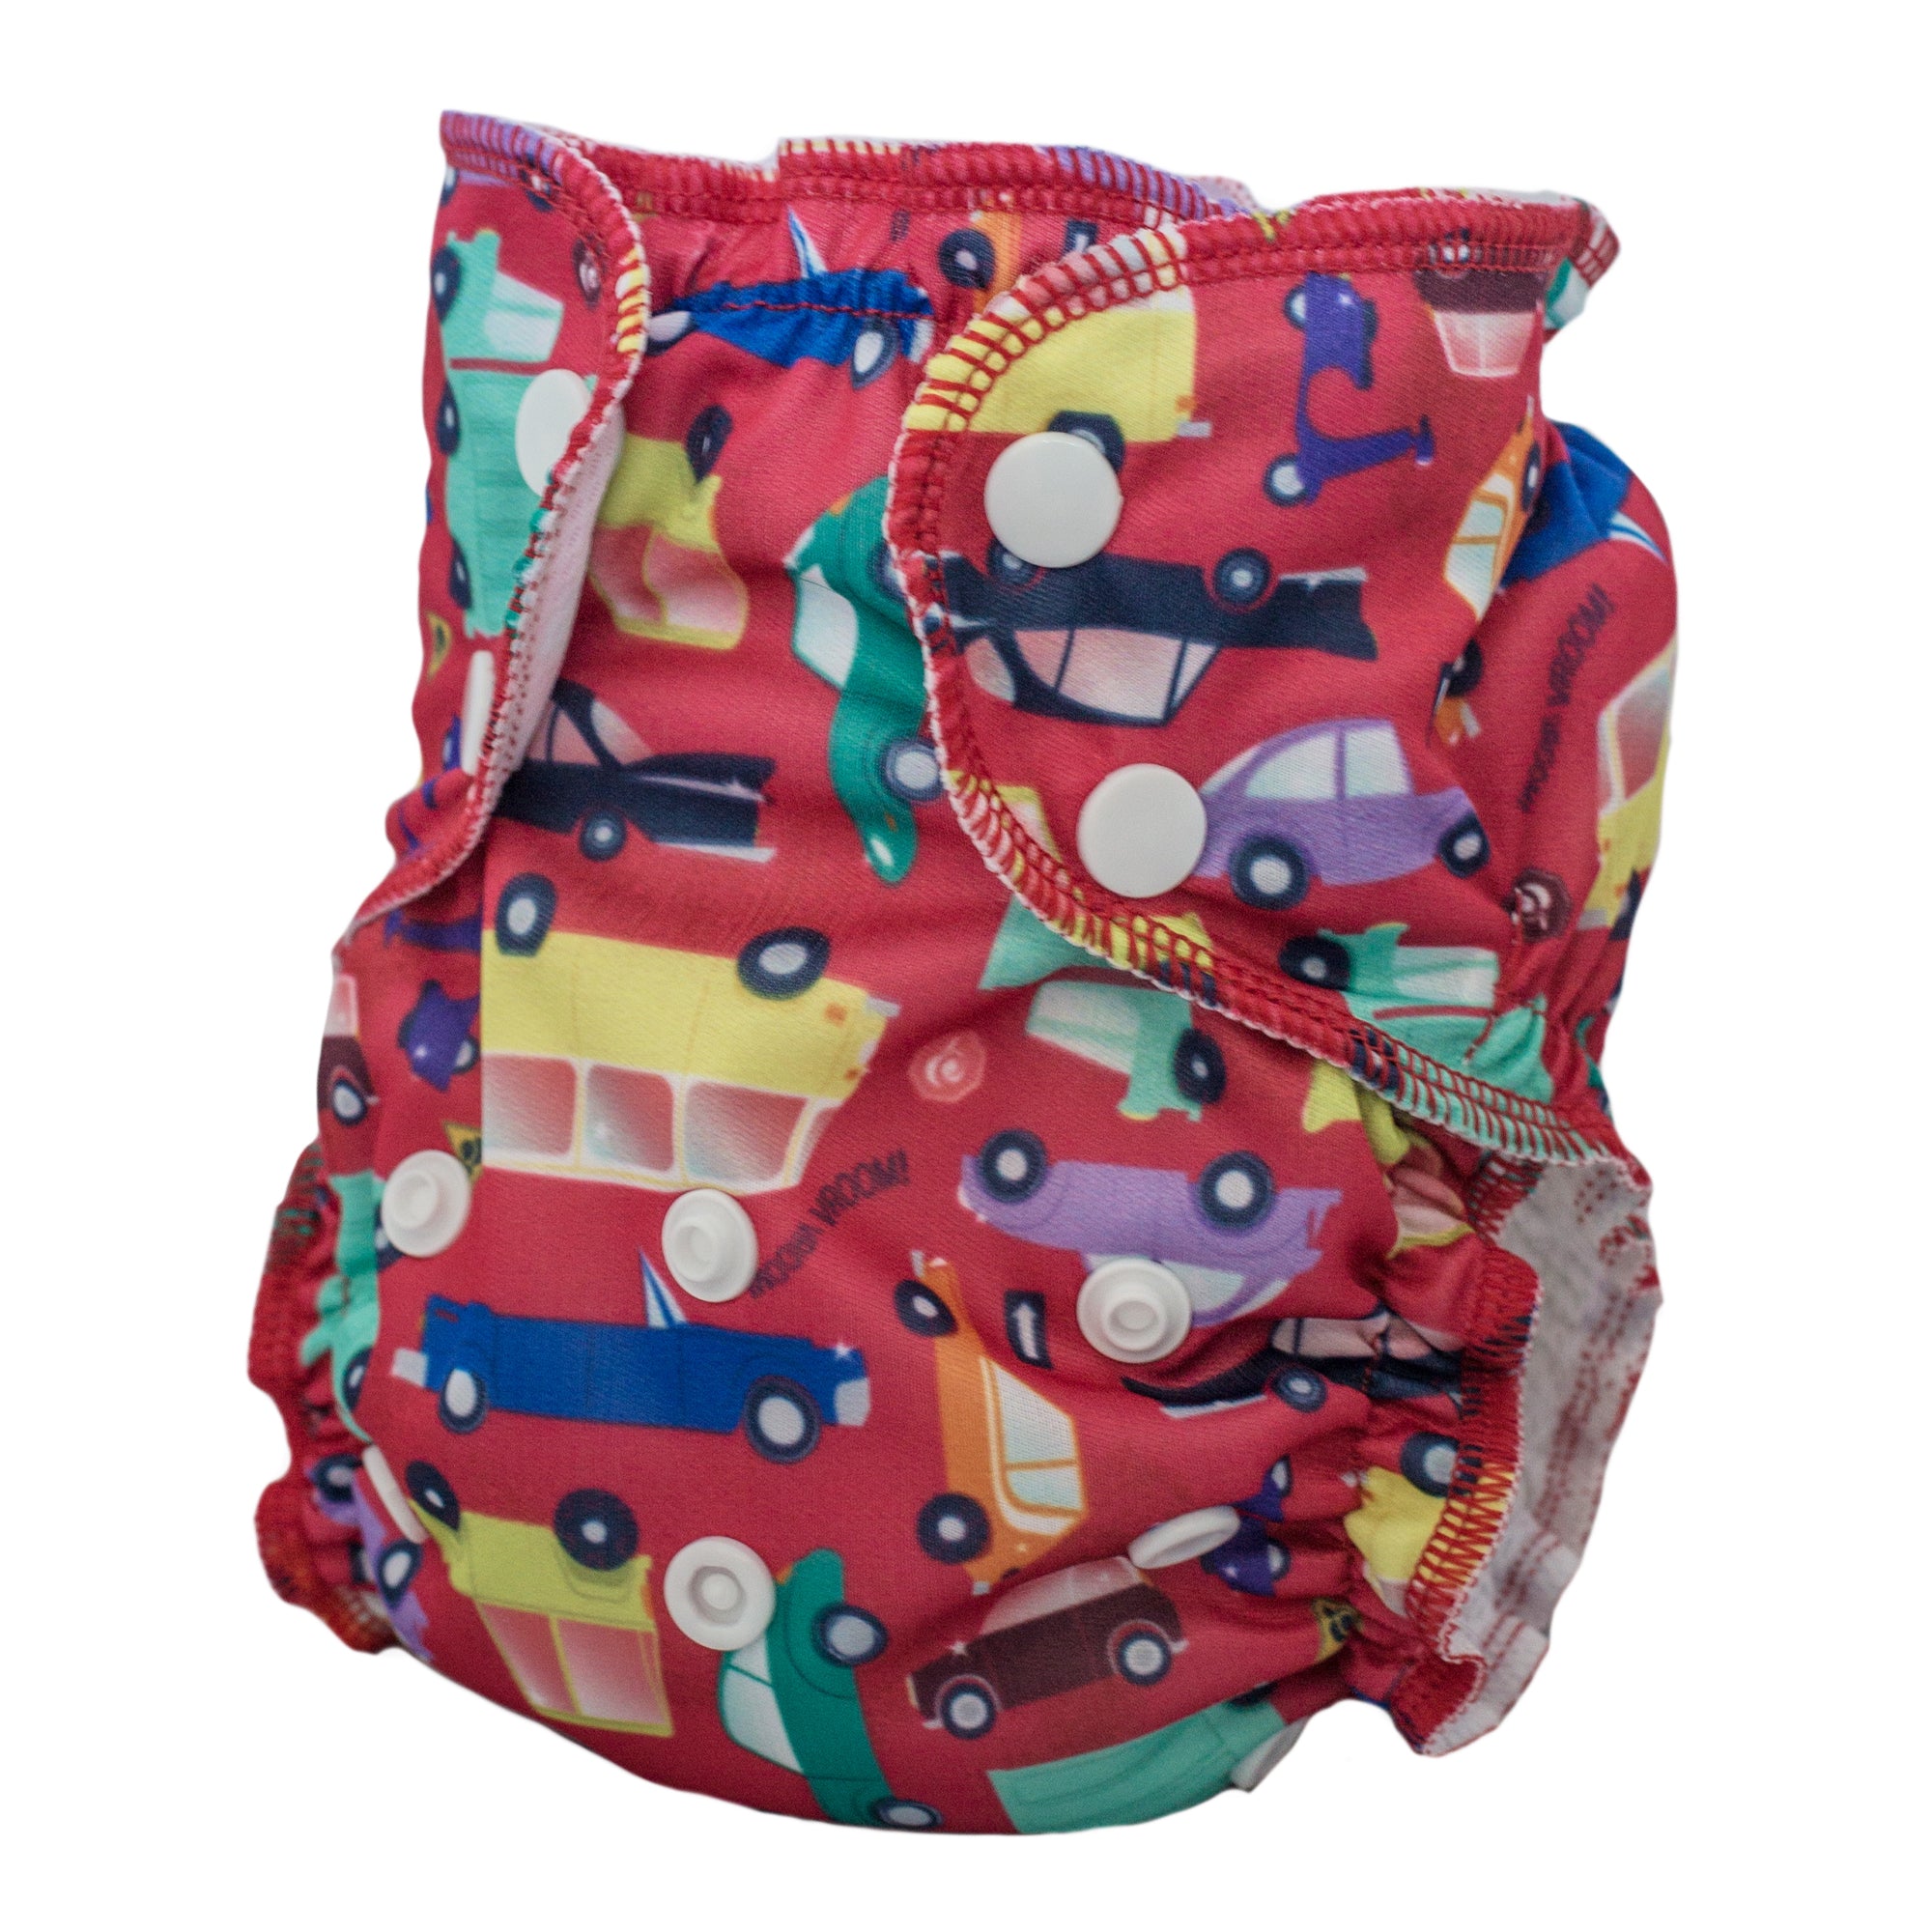 Washable Swim Diapers (One Size)